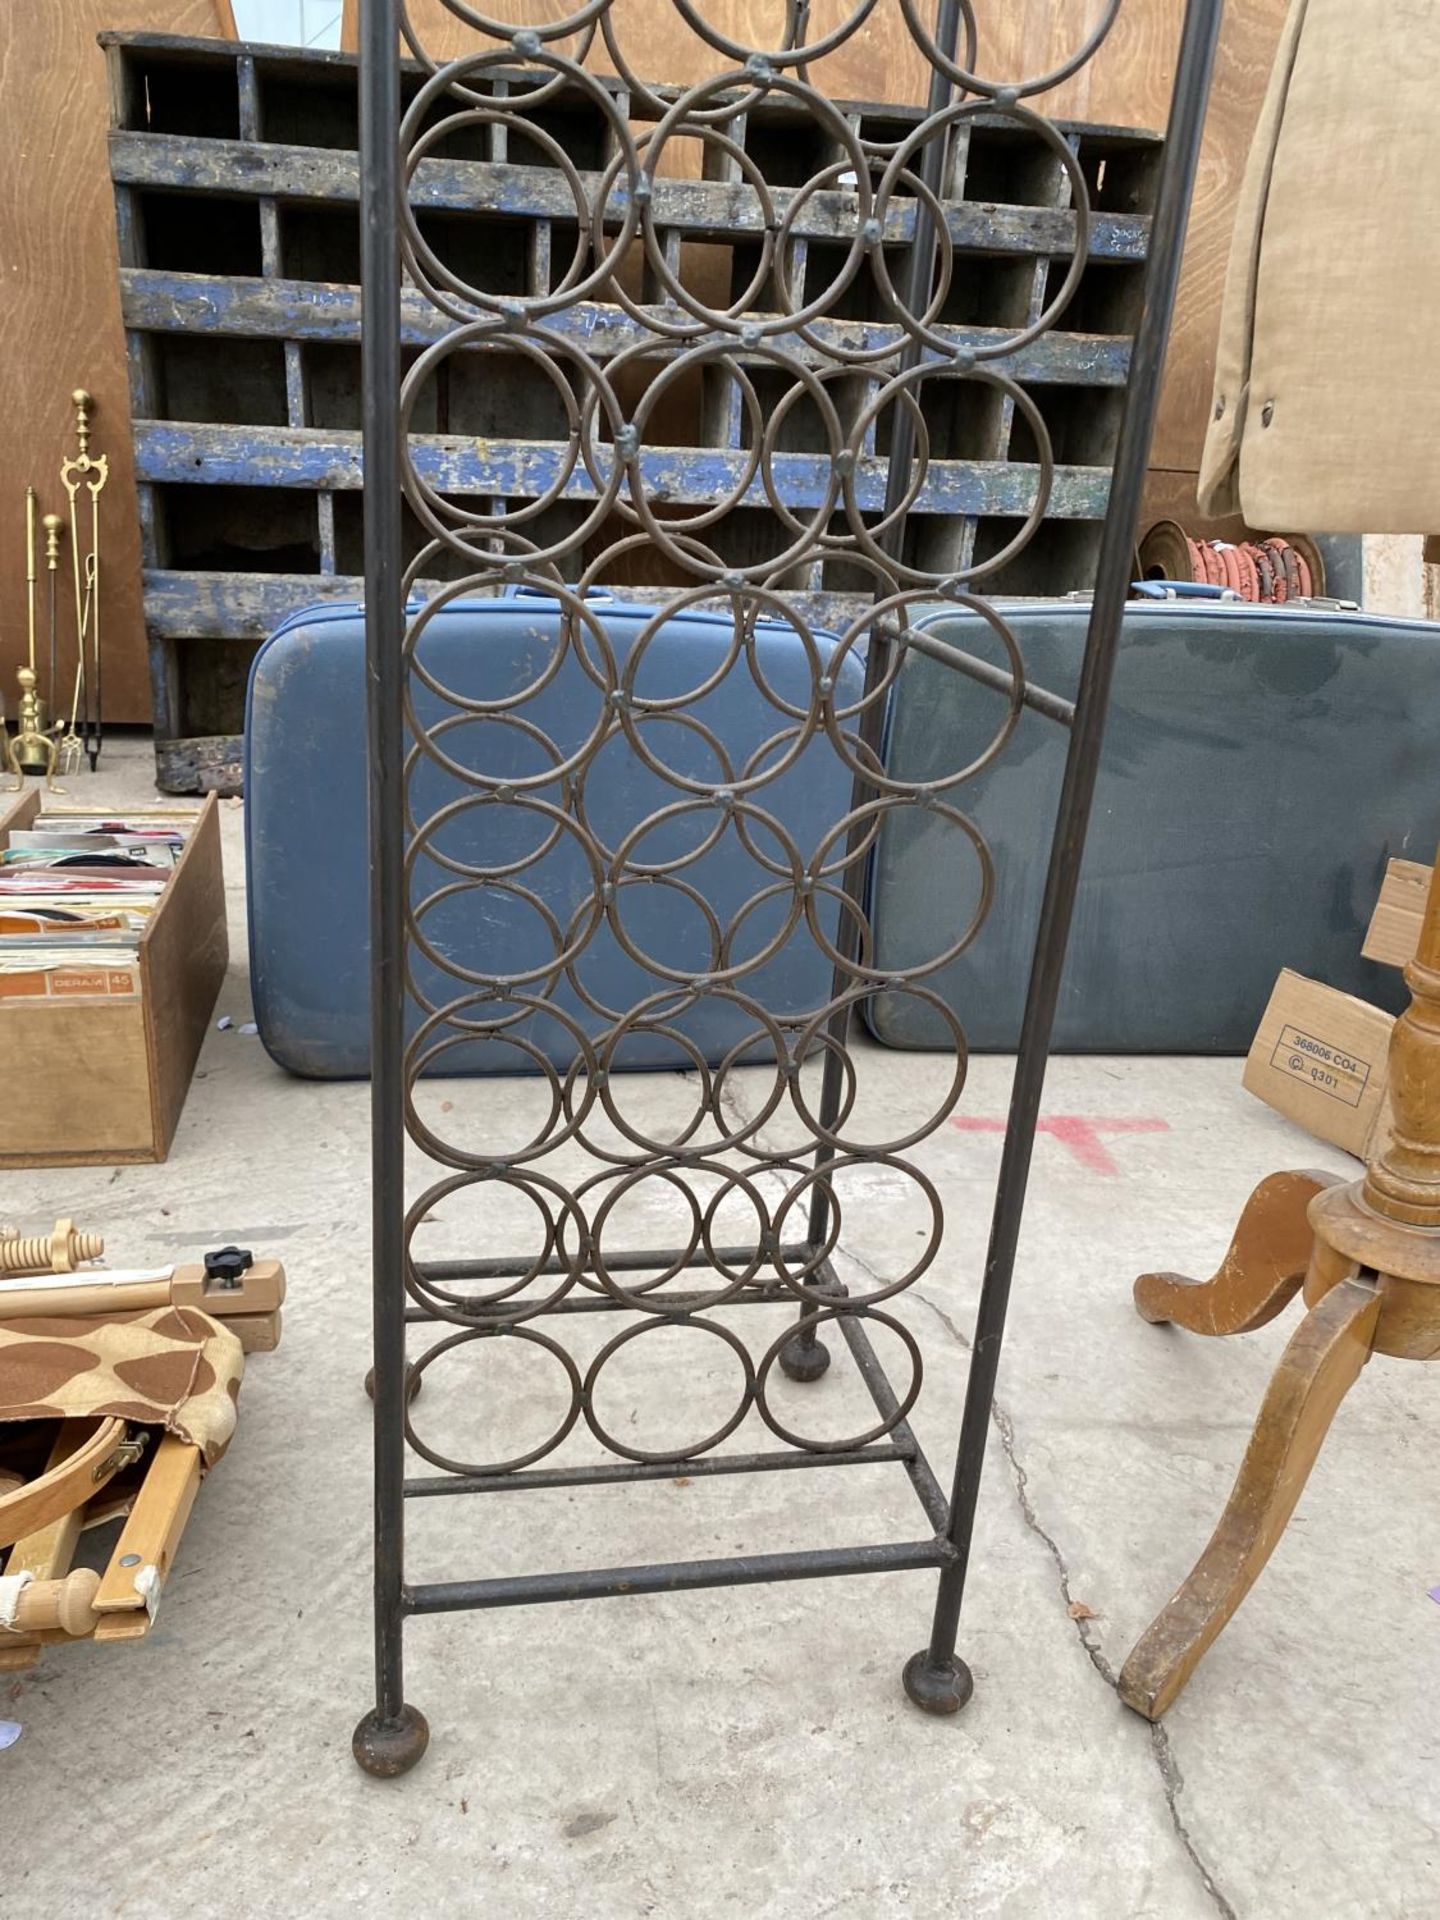 A HEAVY WROUGHT IRON 30 BOTTLE WINE RACK - Image 2 of 3